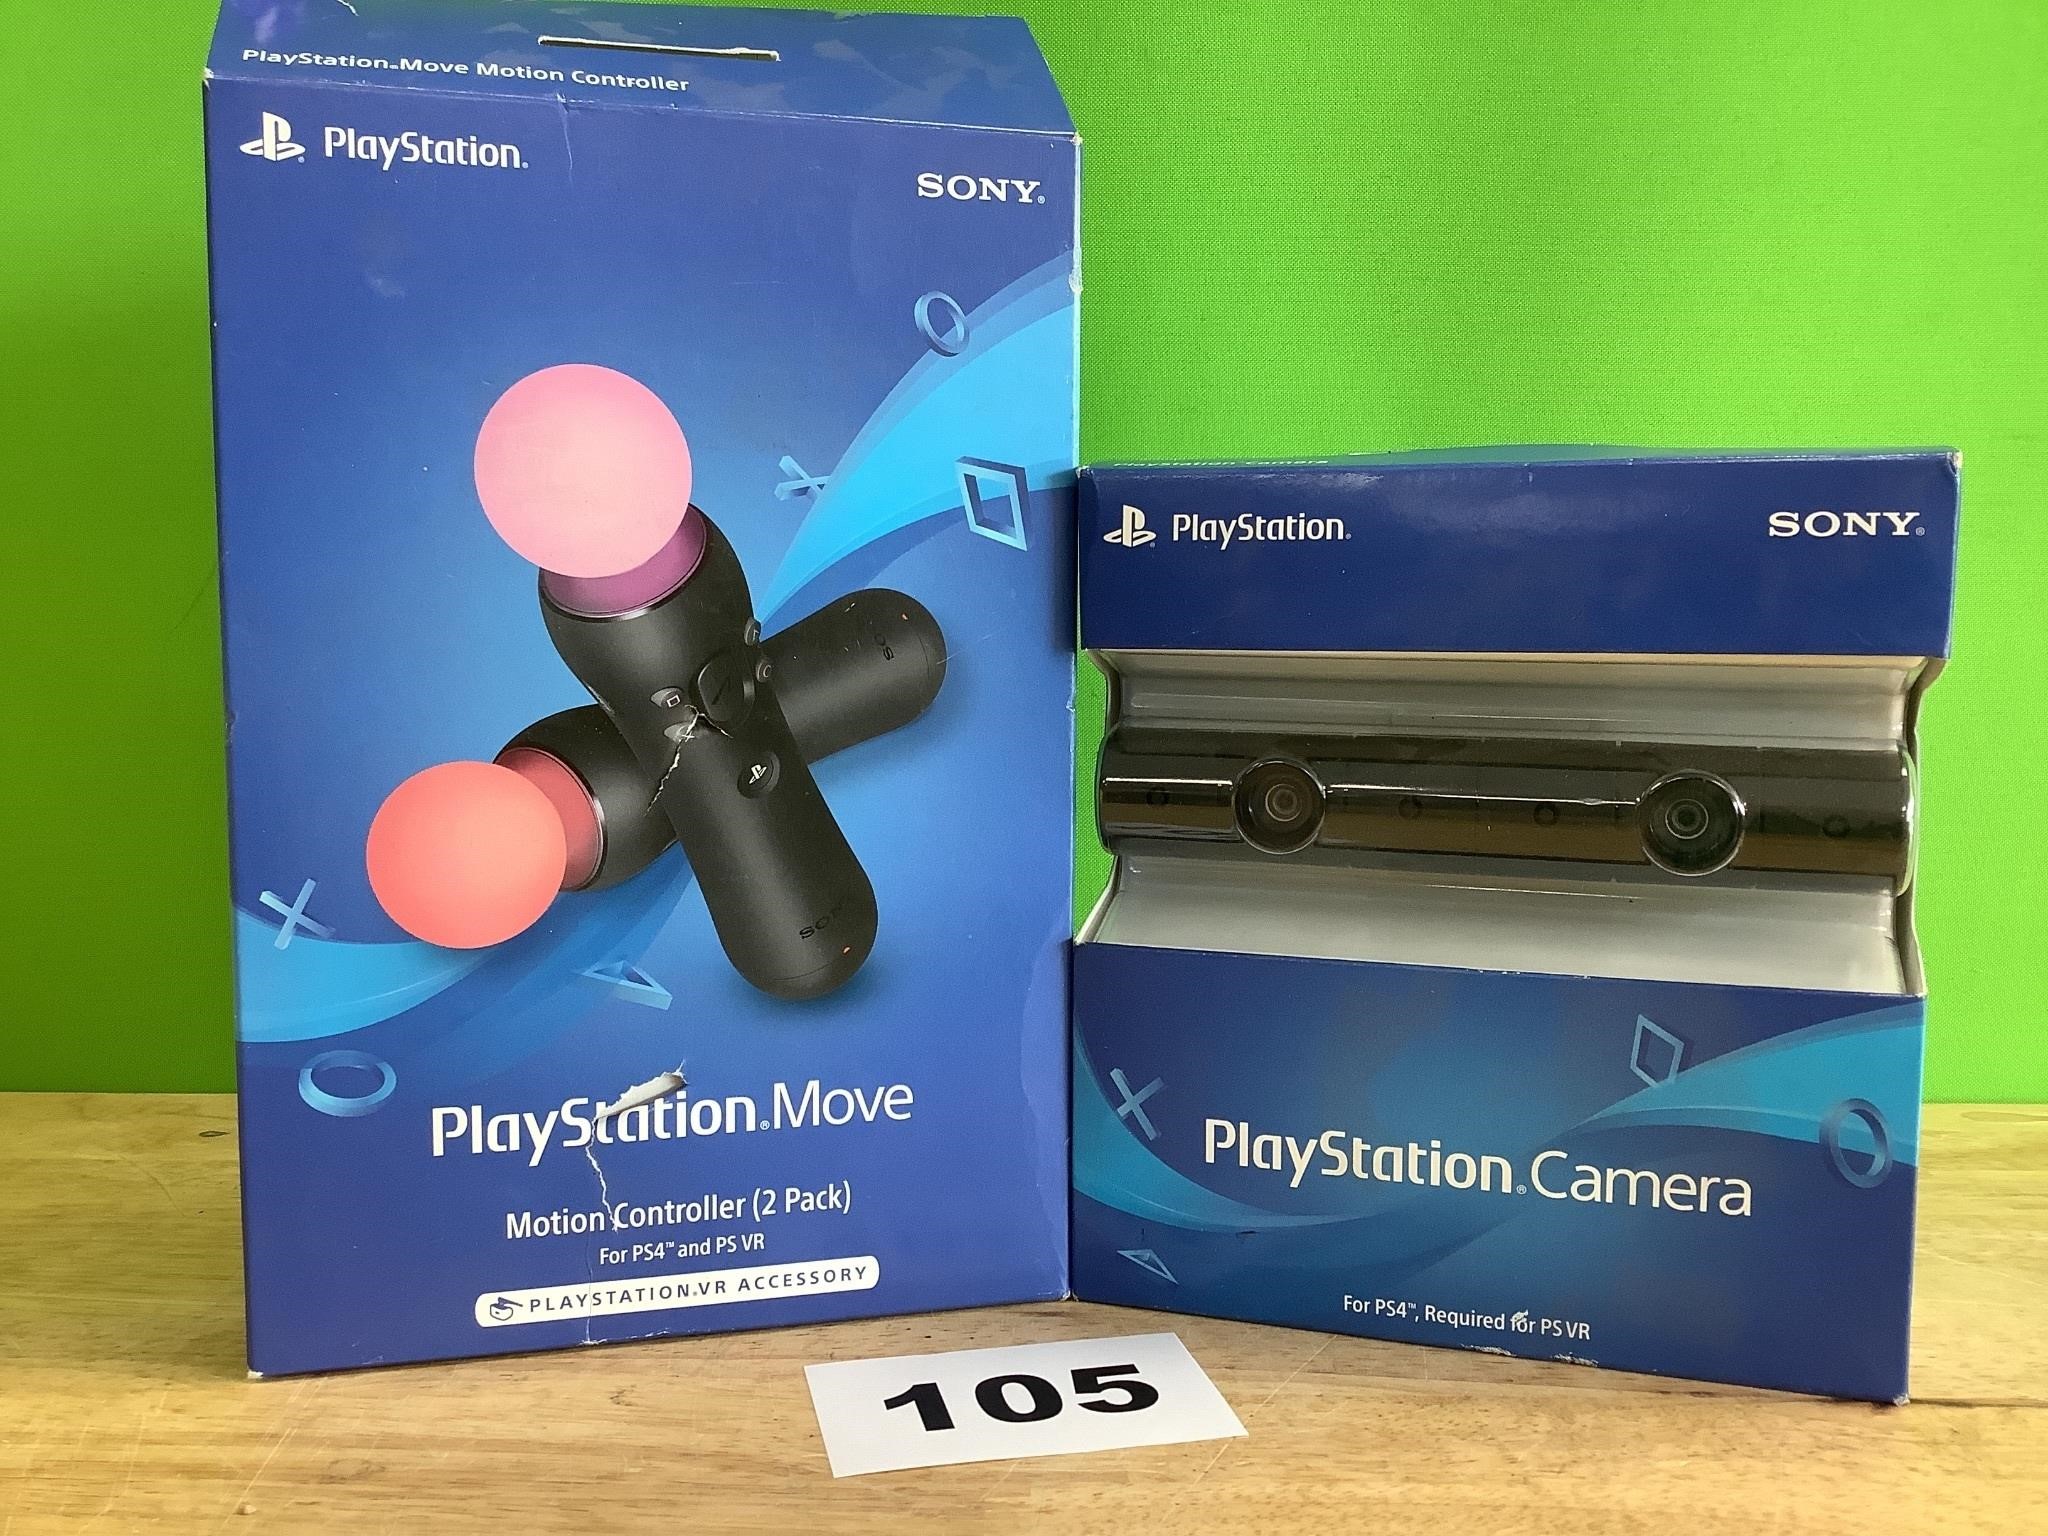 PlayStation Move Controllers and Camera for PS VR